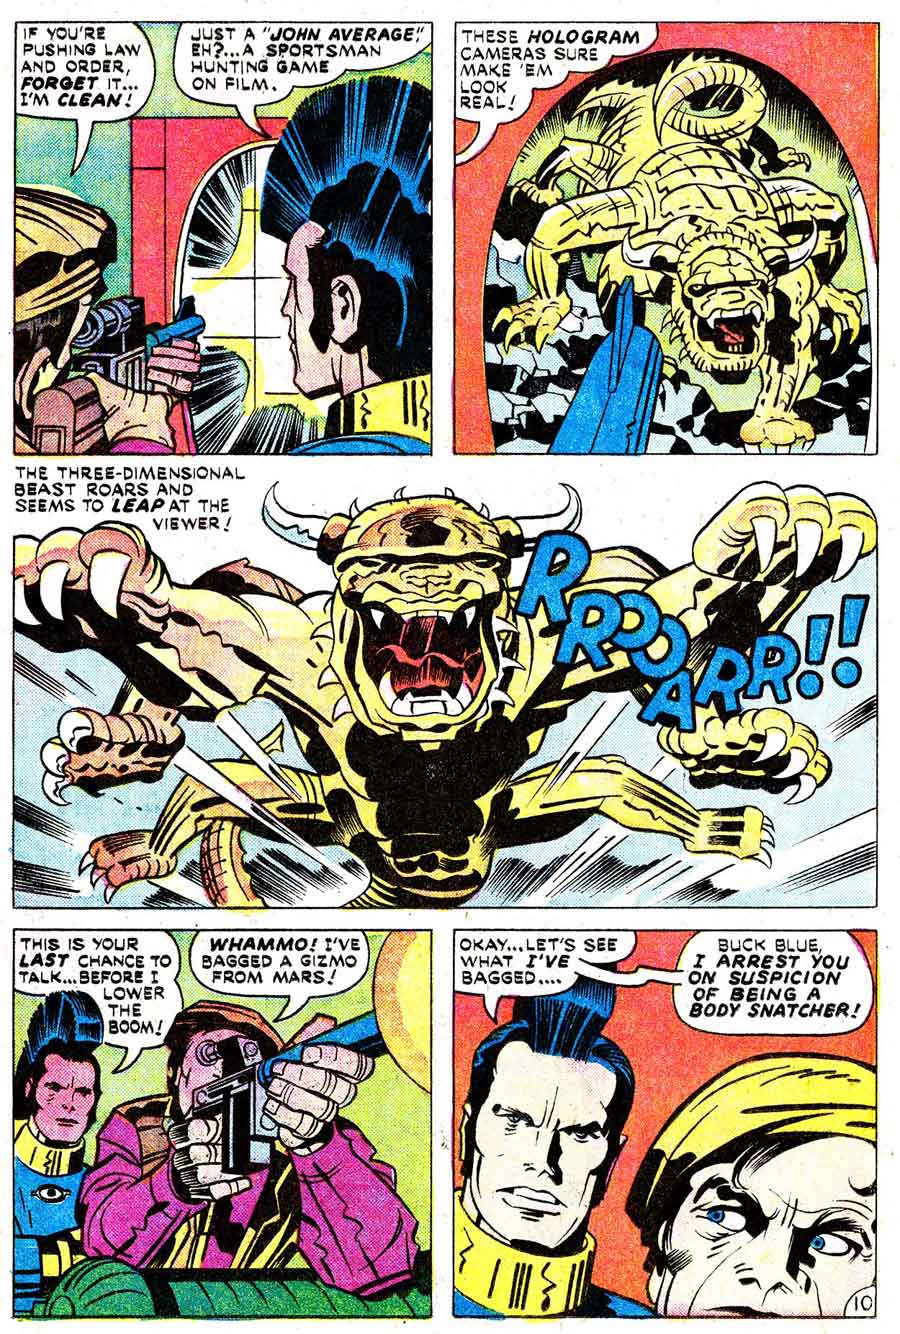 Omac v1 #5 dc bronze age comic book page art by Jack Kirby